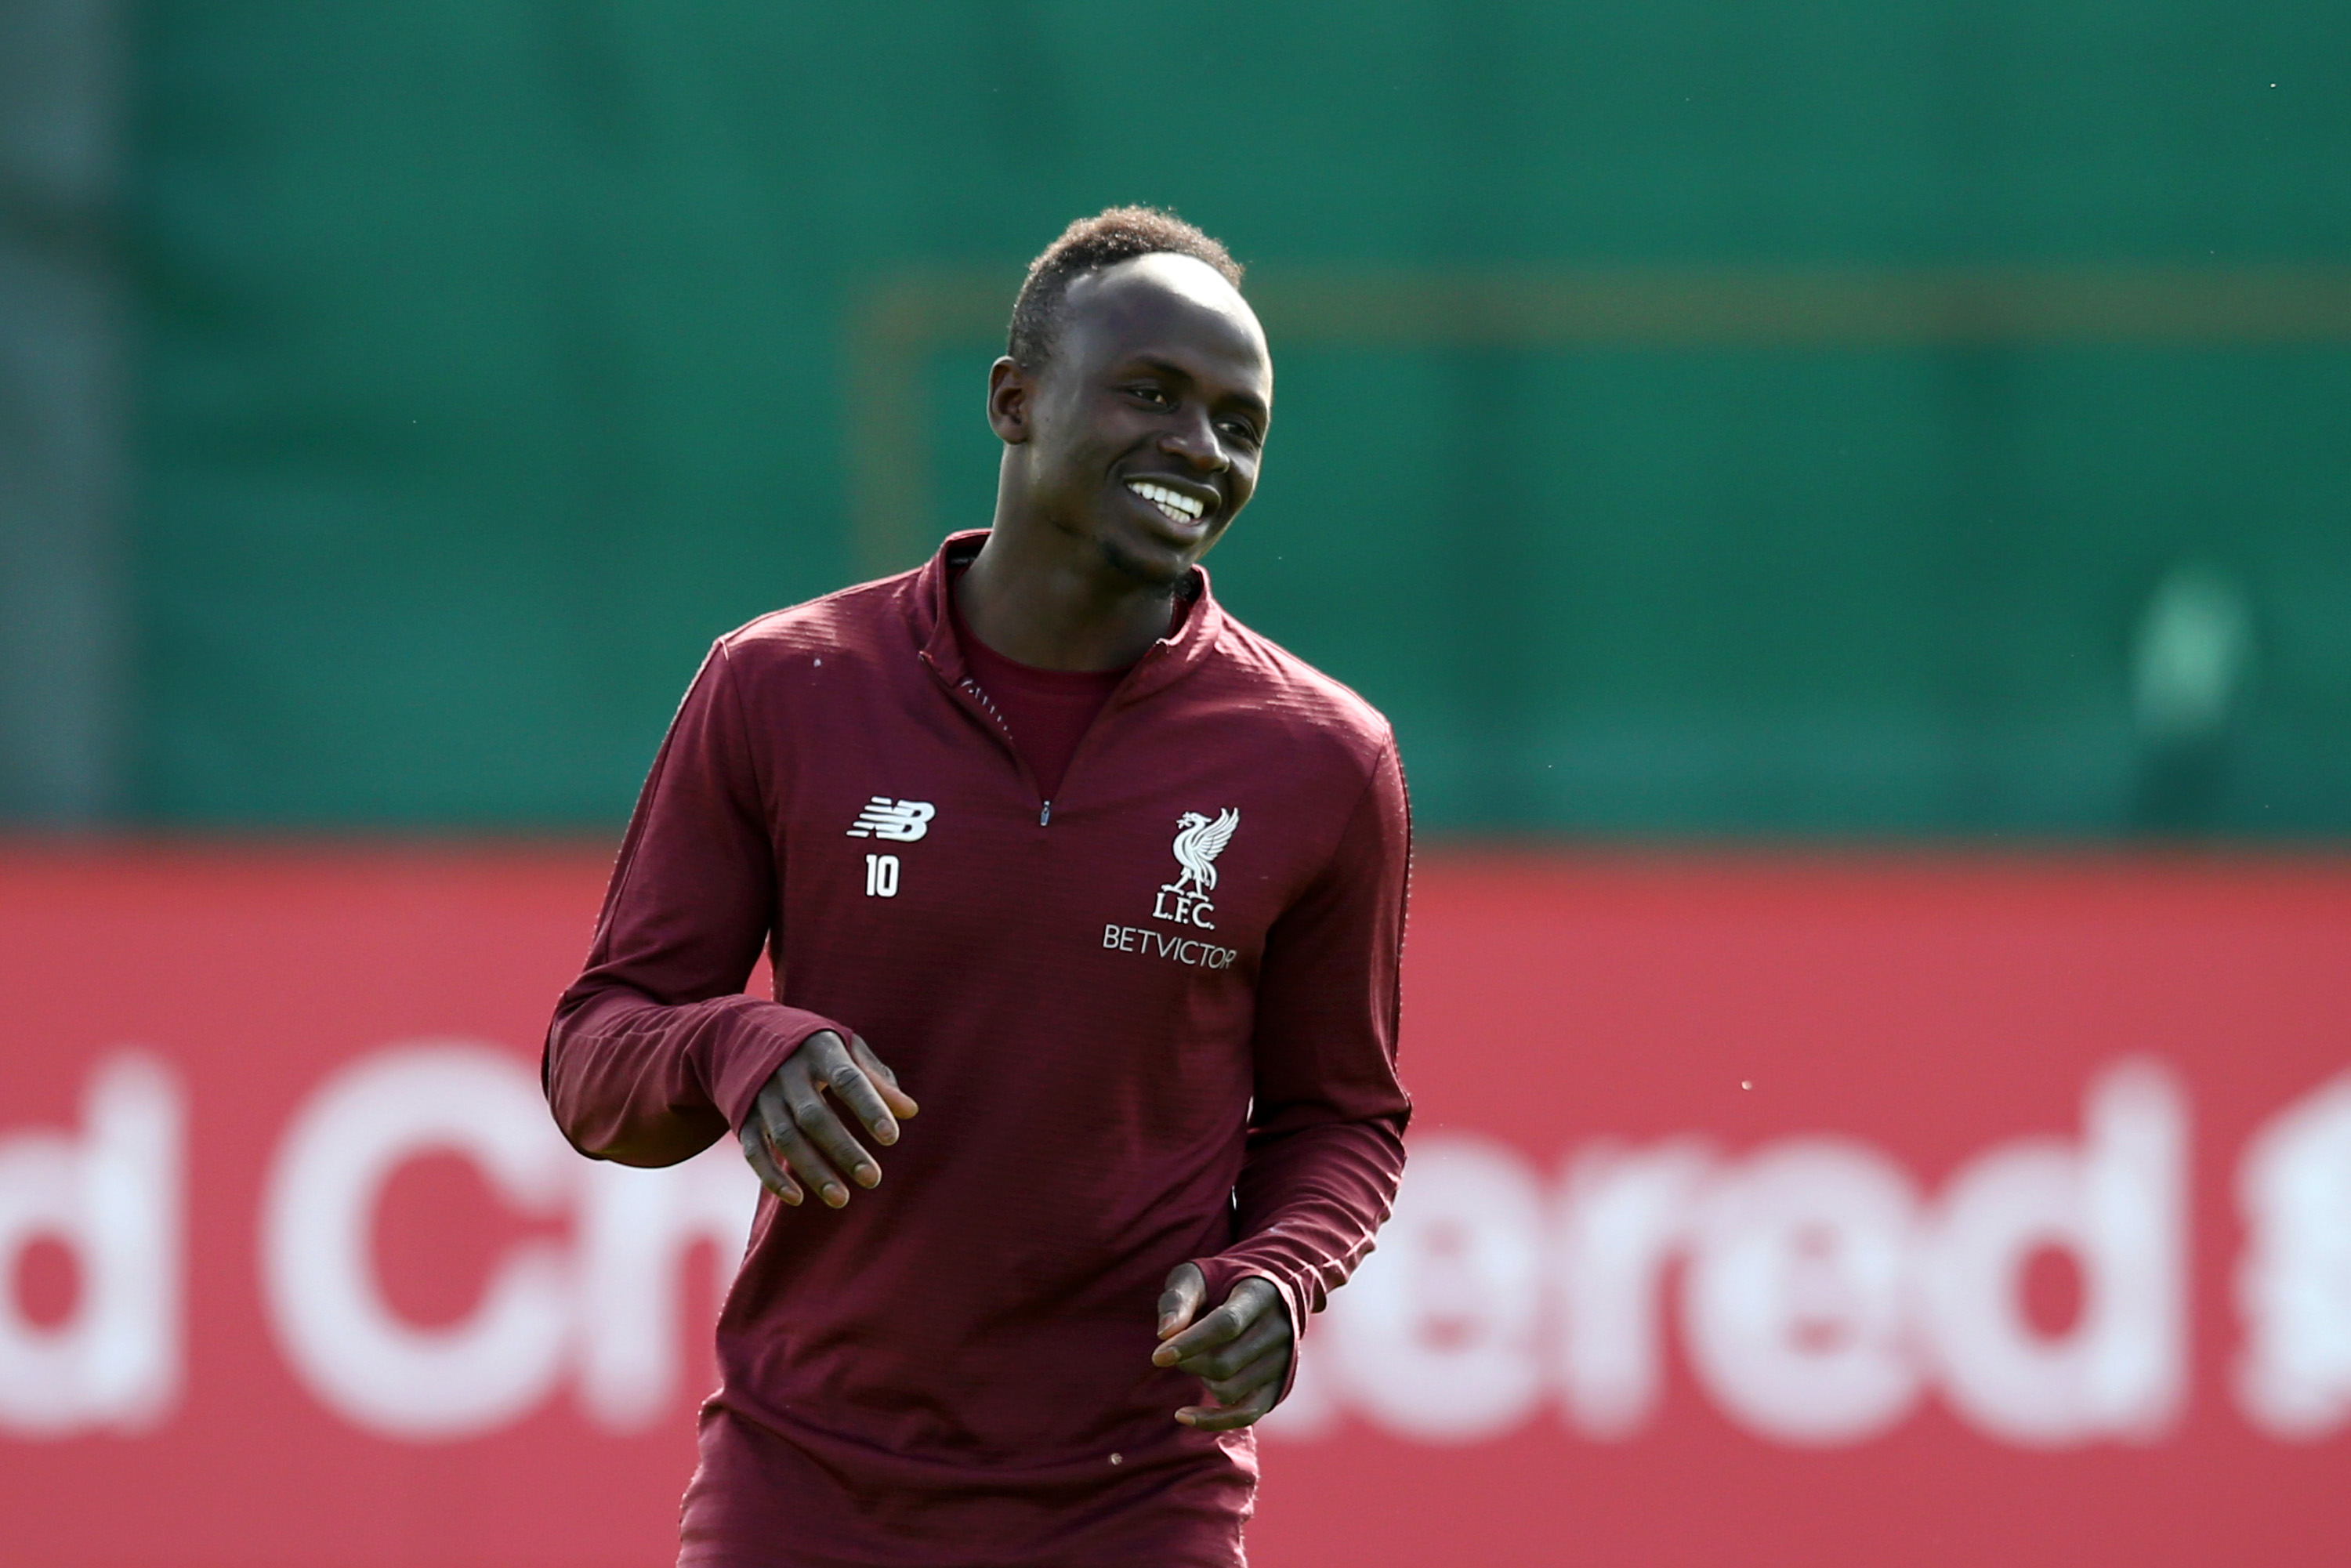 LIVERPOOL, ENGLAND - MAY 06: Sadio Mane of Liverpool reacts during a training session ahead of their UEFA Champions League second leg semi finals match against Barcelona at Melwood on May 06, 2019 in Liverpool, England. (Photo by Jan Kruger/Getty Images)